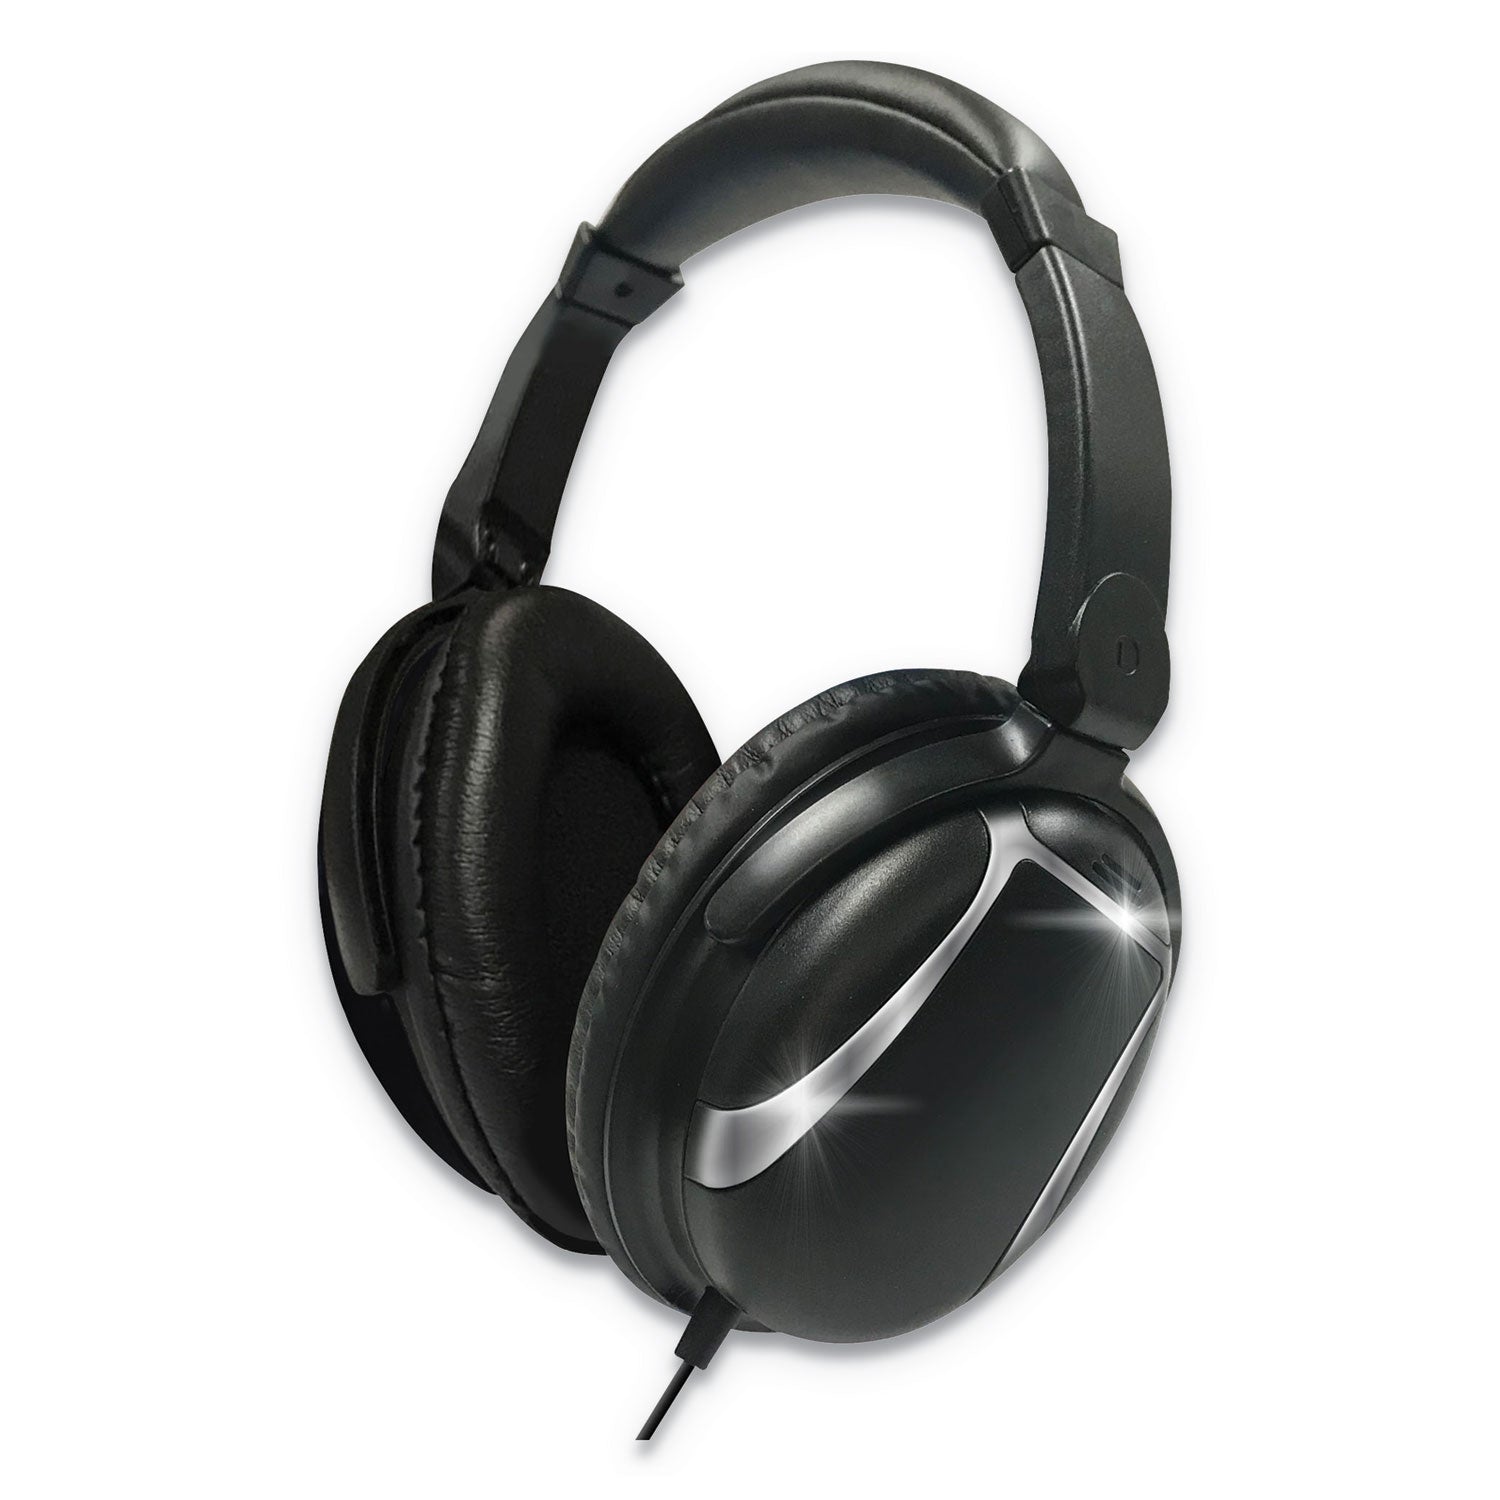 bass-13-headphone-with-mic-4-ft-cord-black_max199840 - 1